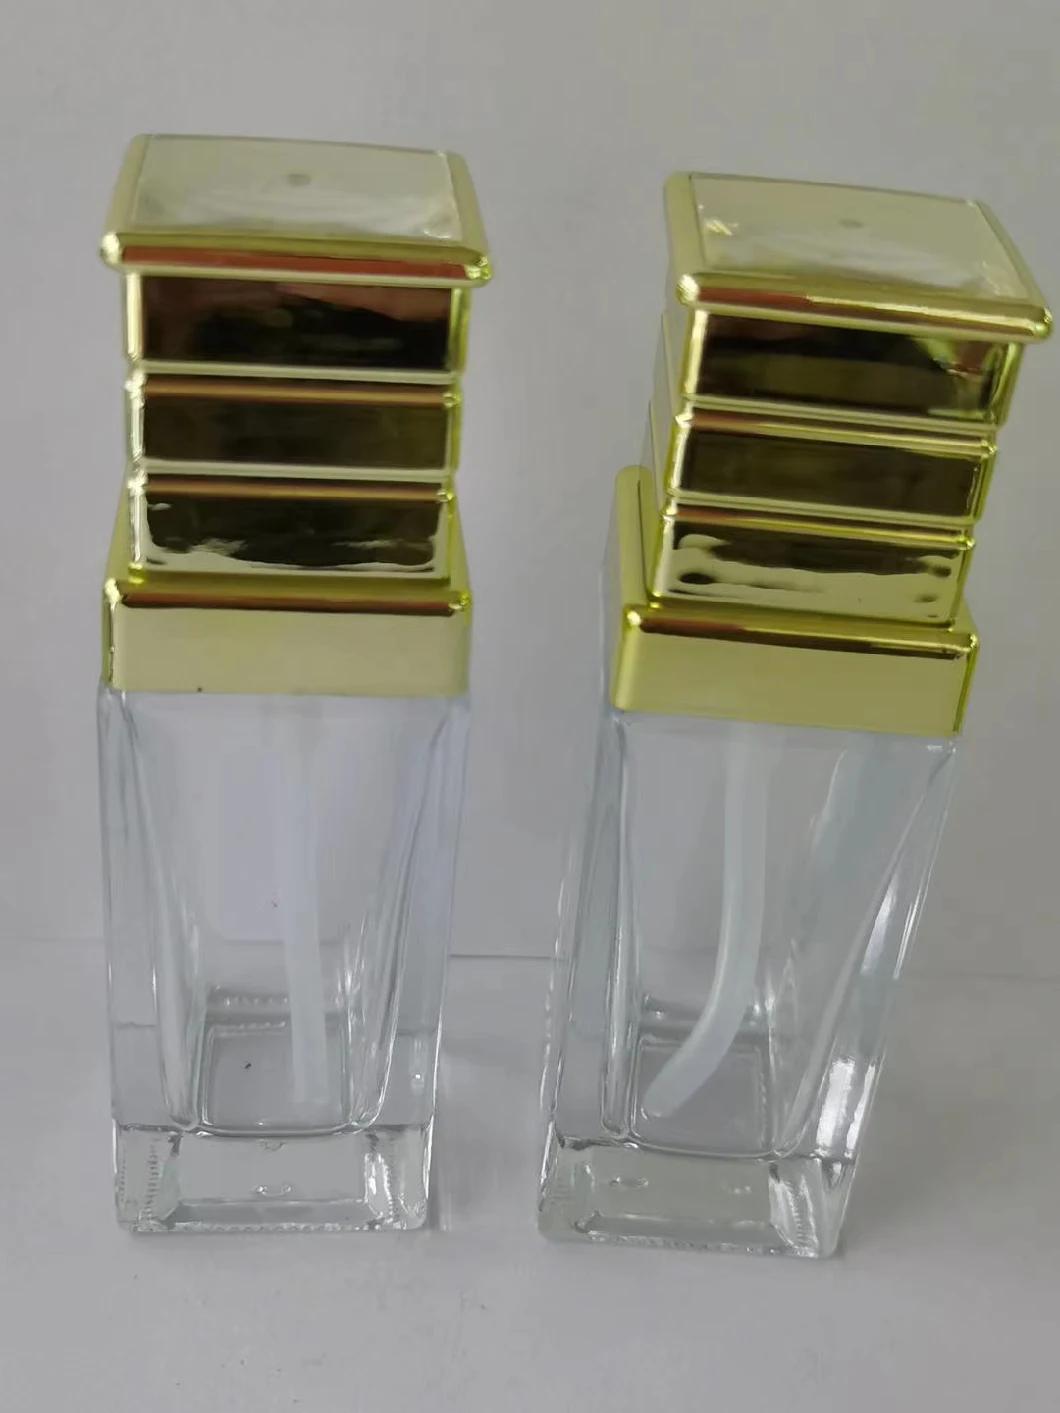 Ds006  24K Gold Cosmetic Glass Bottle Have Stock